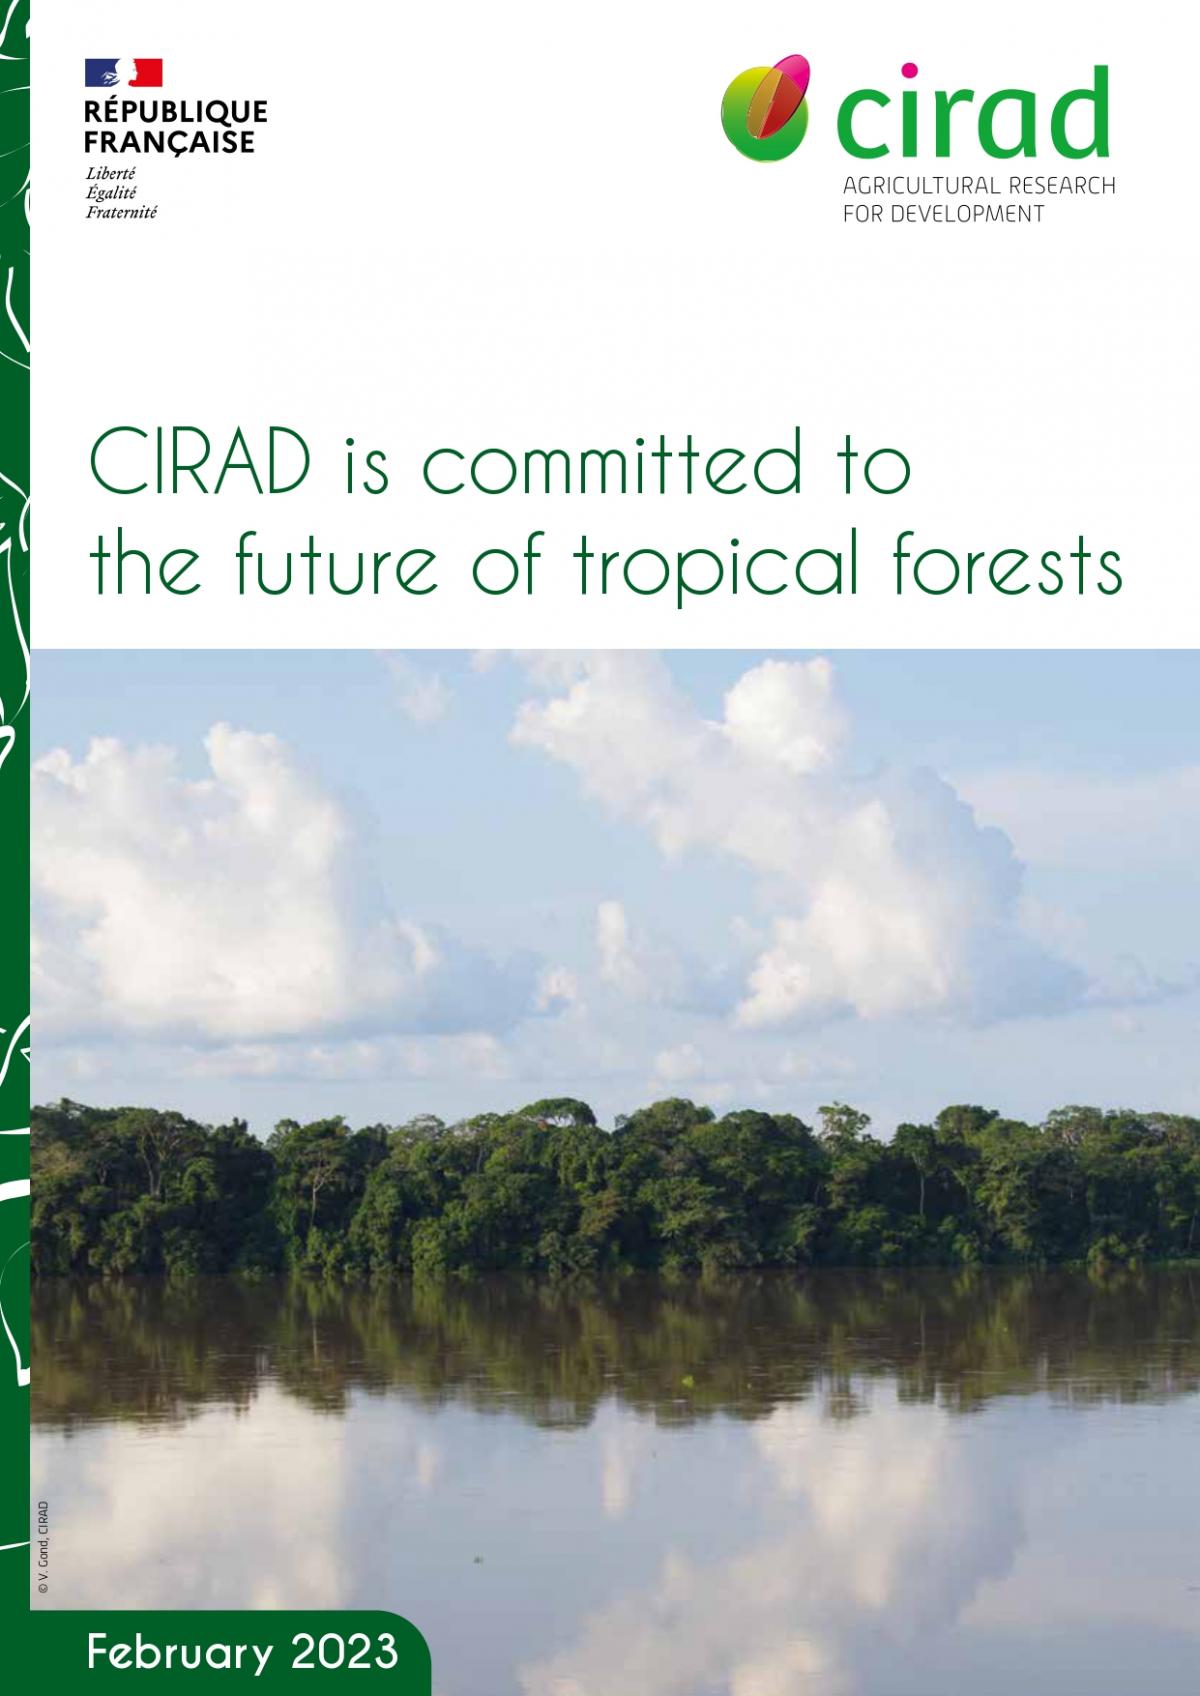 CIRAD position on the future of tropical forests